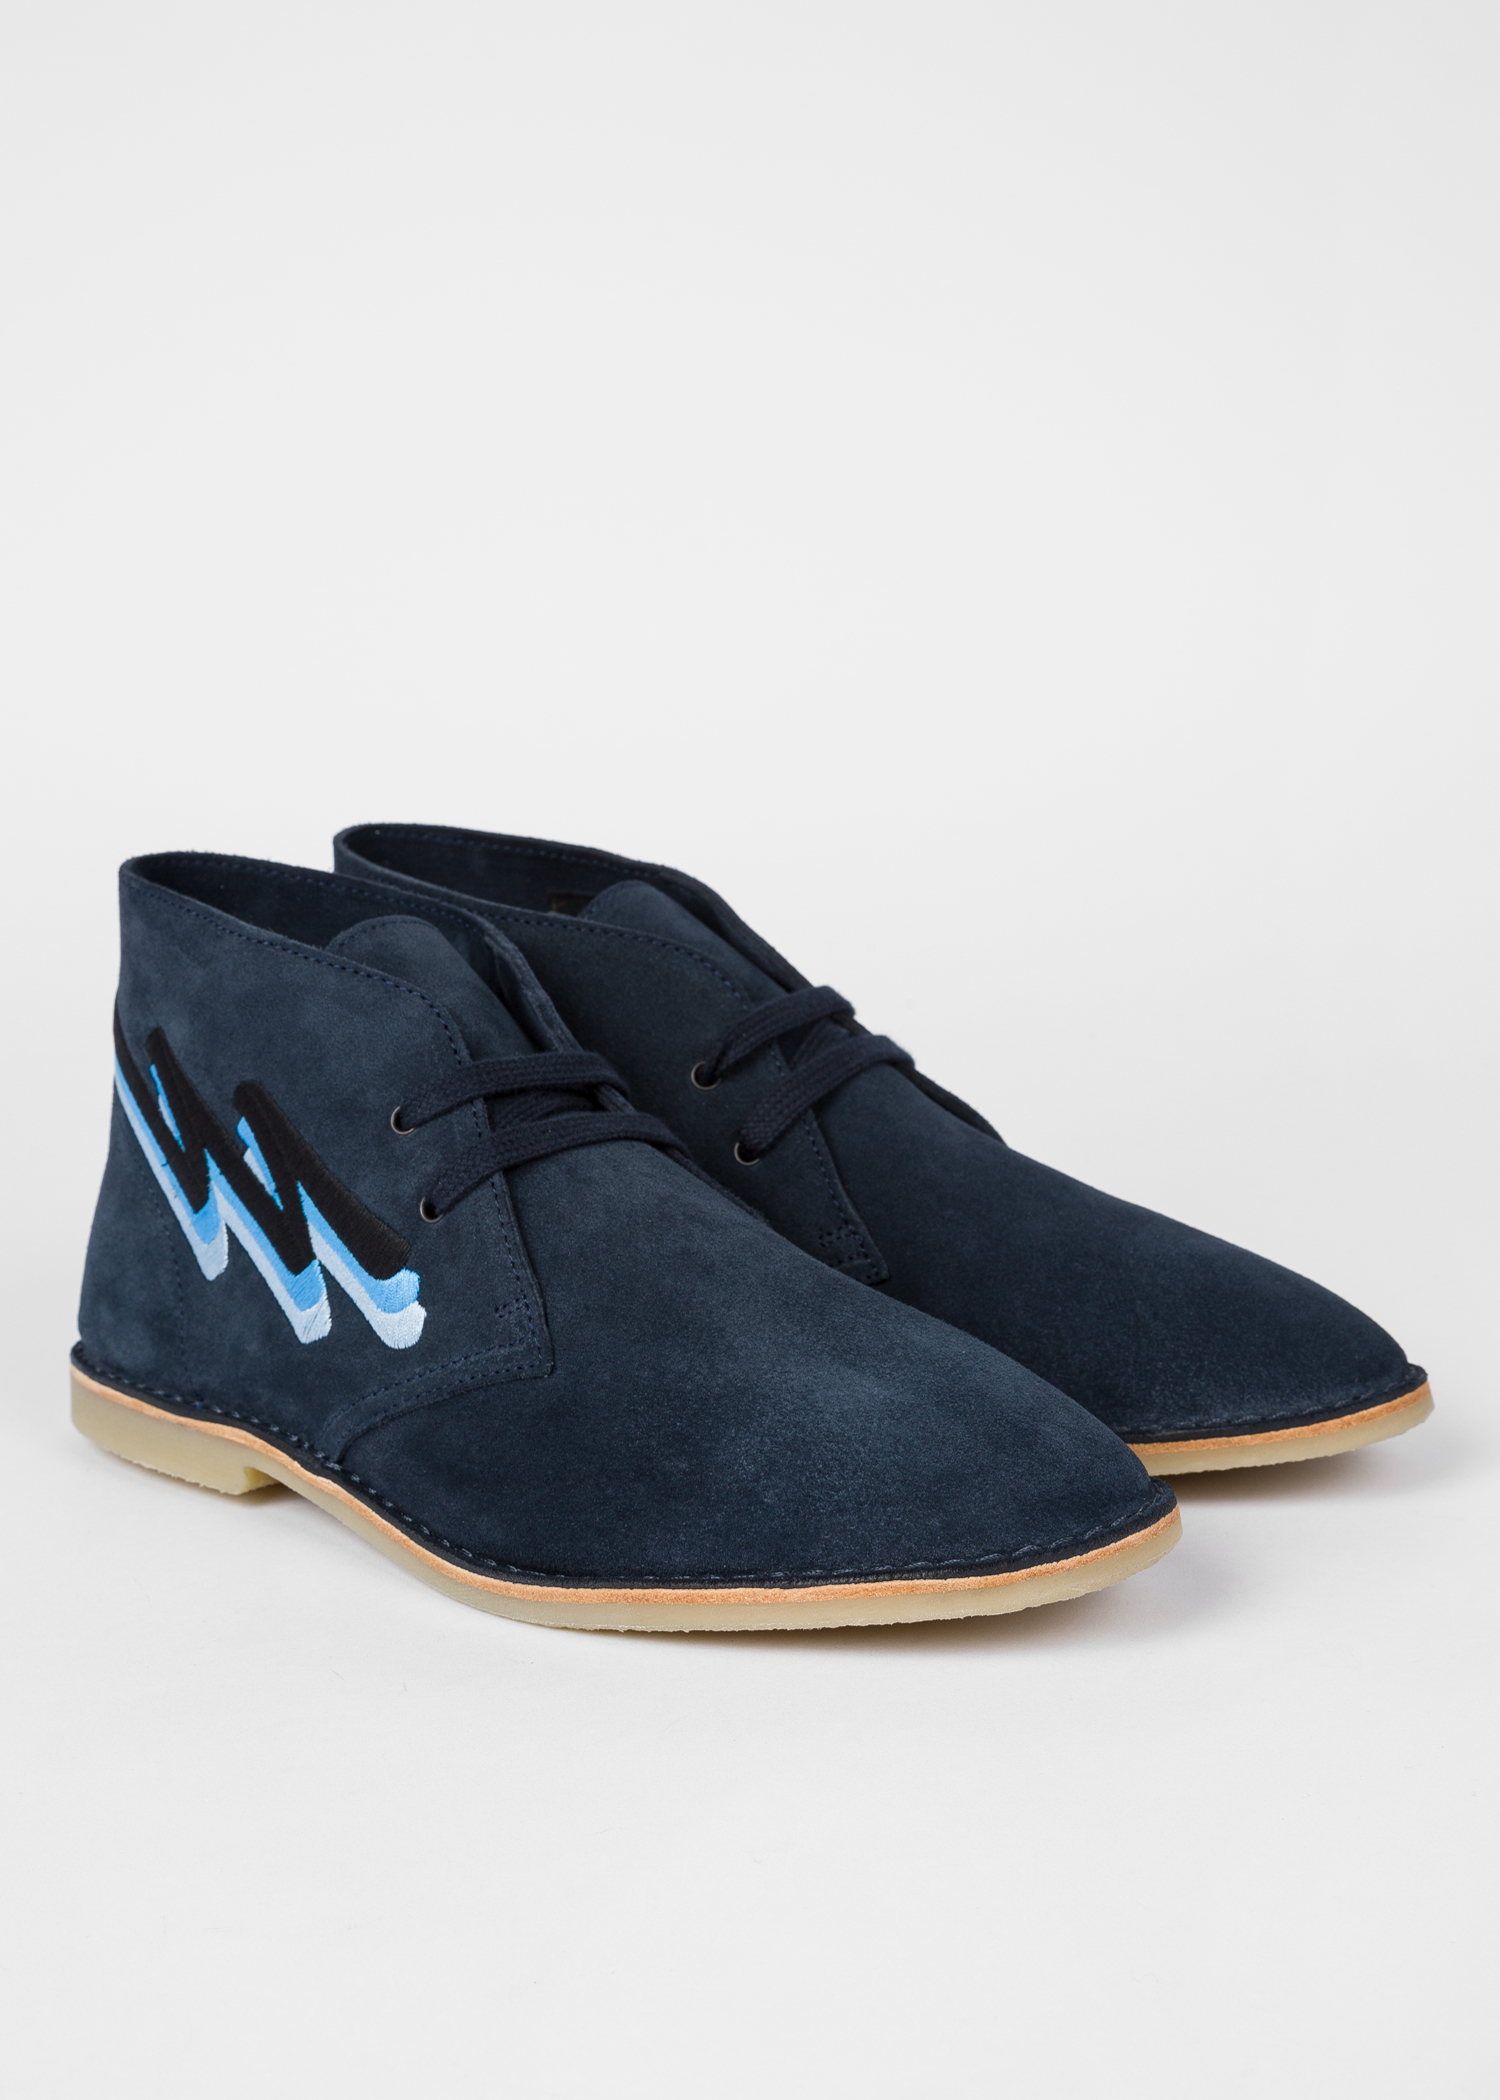 Men's Navy Suede 'Norman' Boots With Embroidery